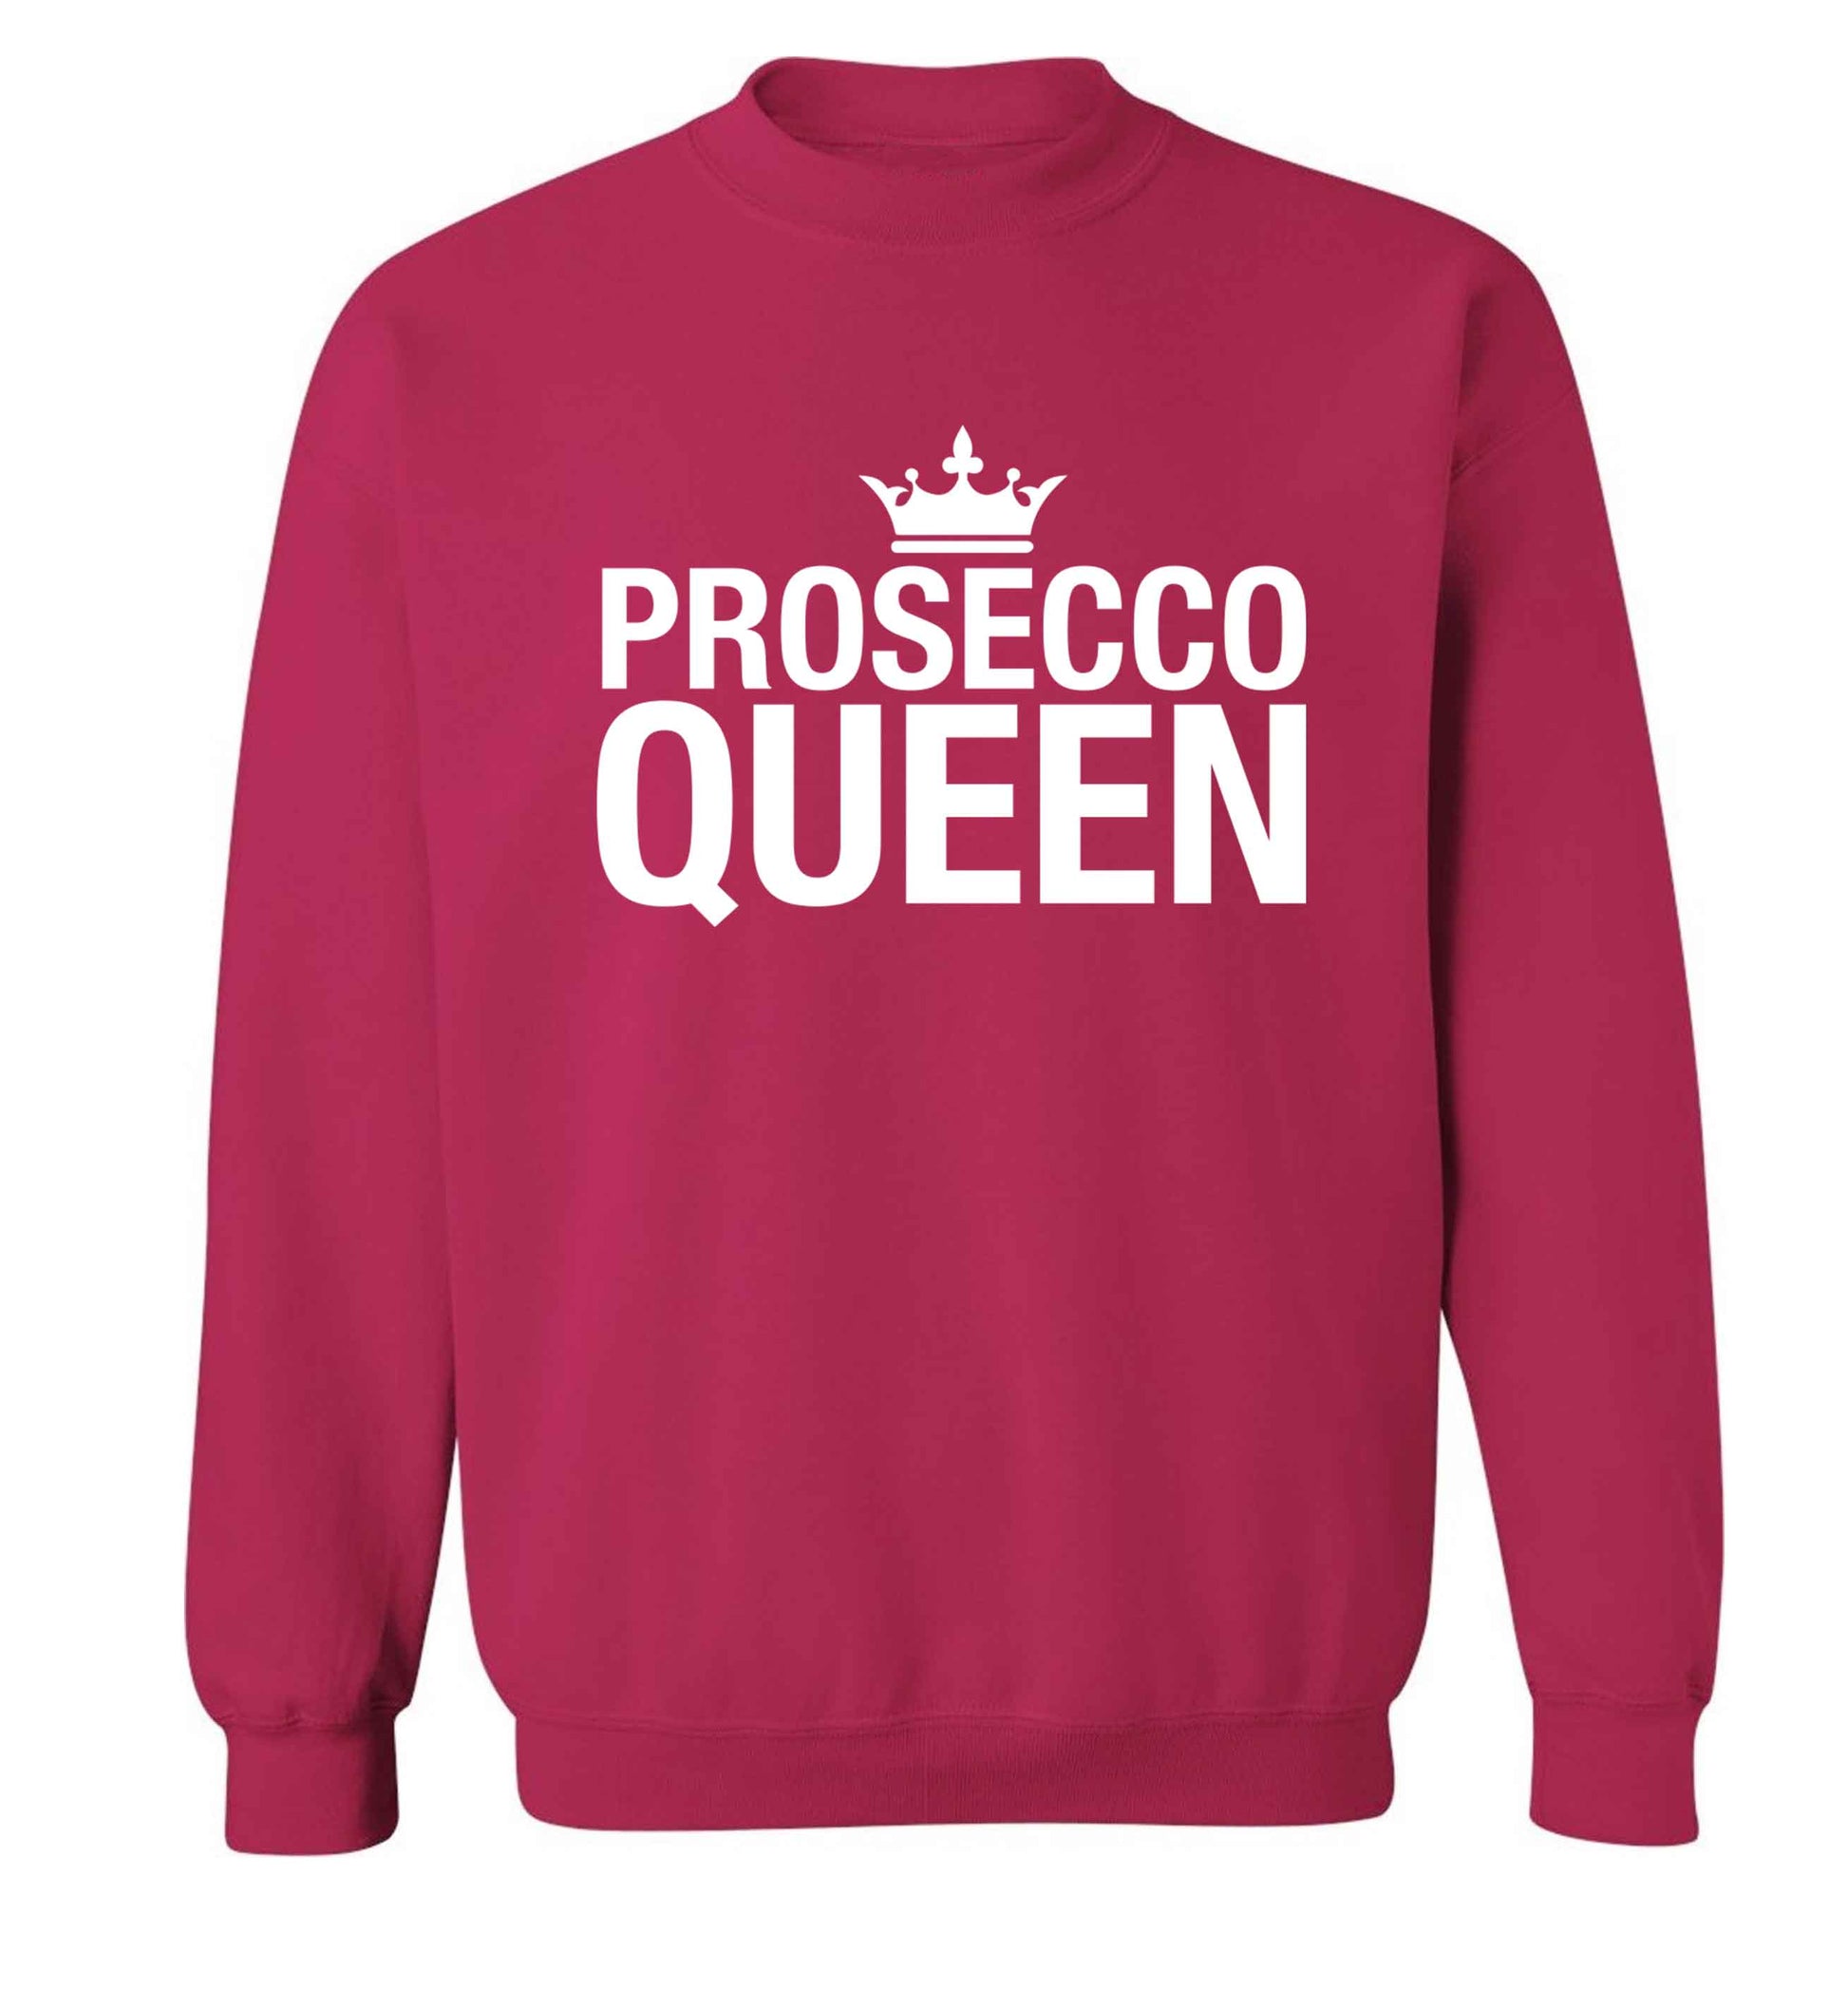 Prosecco queen Adult's unisex pink Sweater 2XL